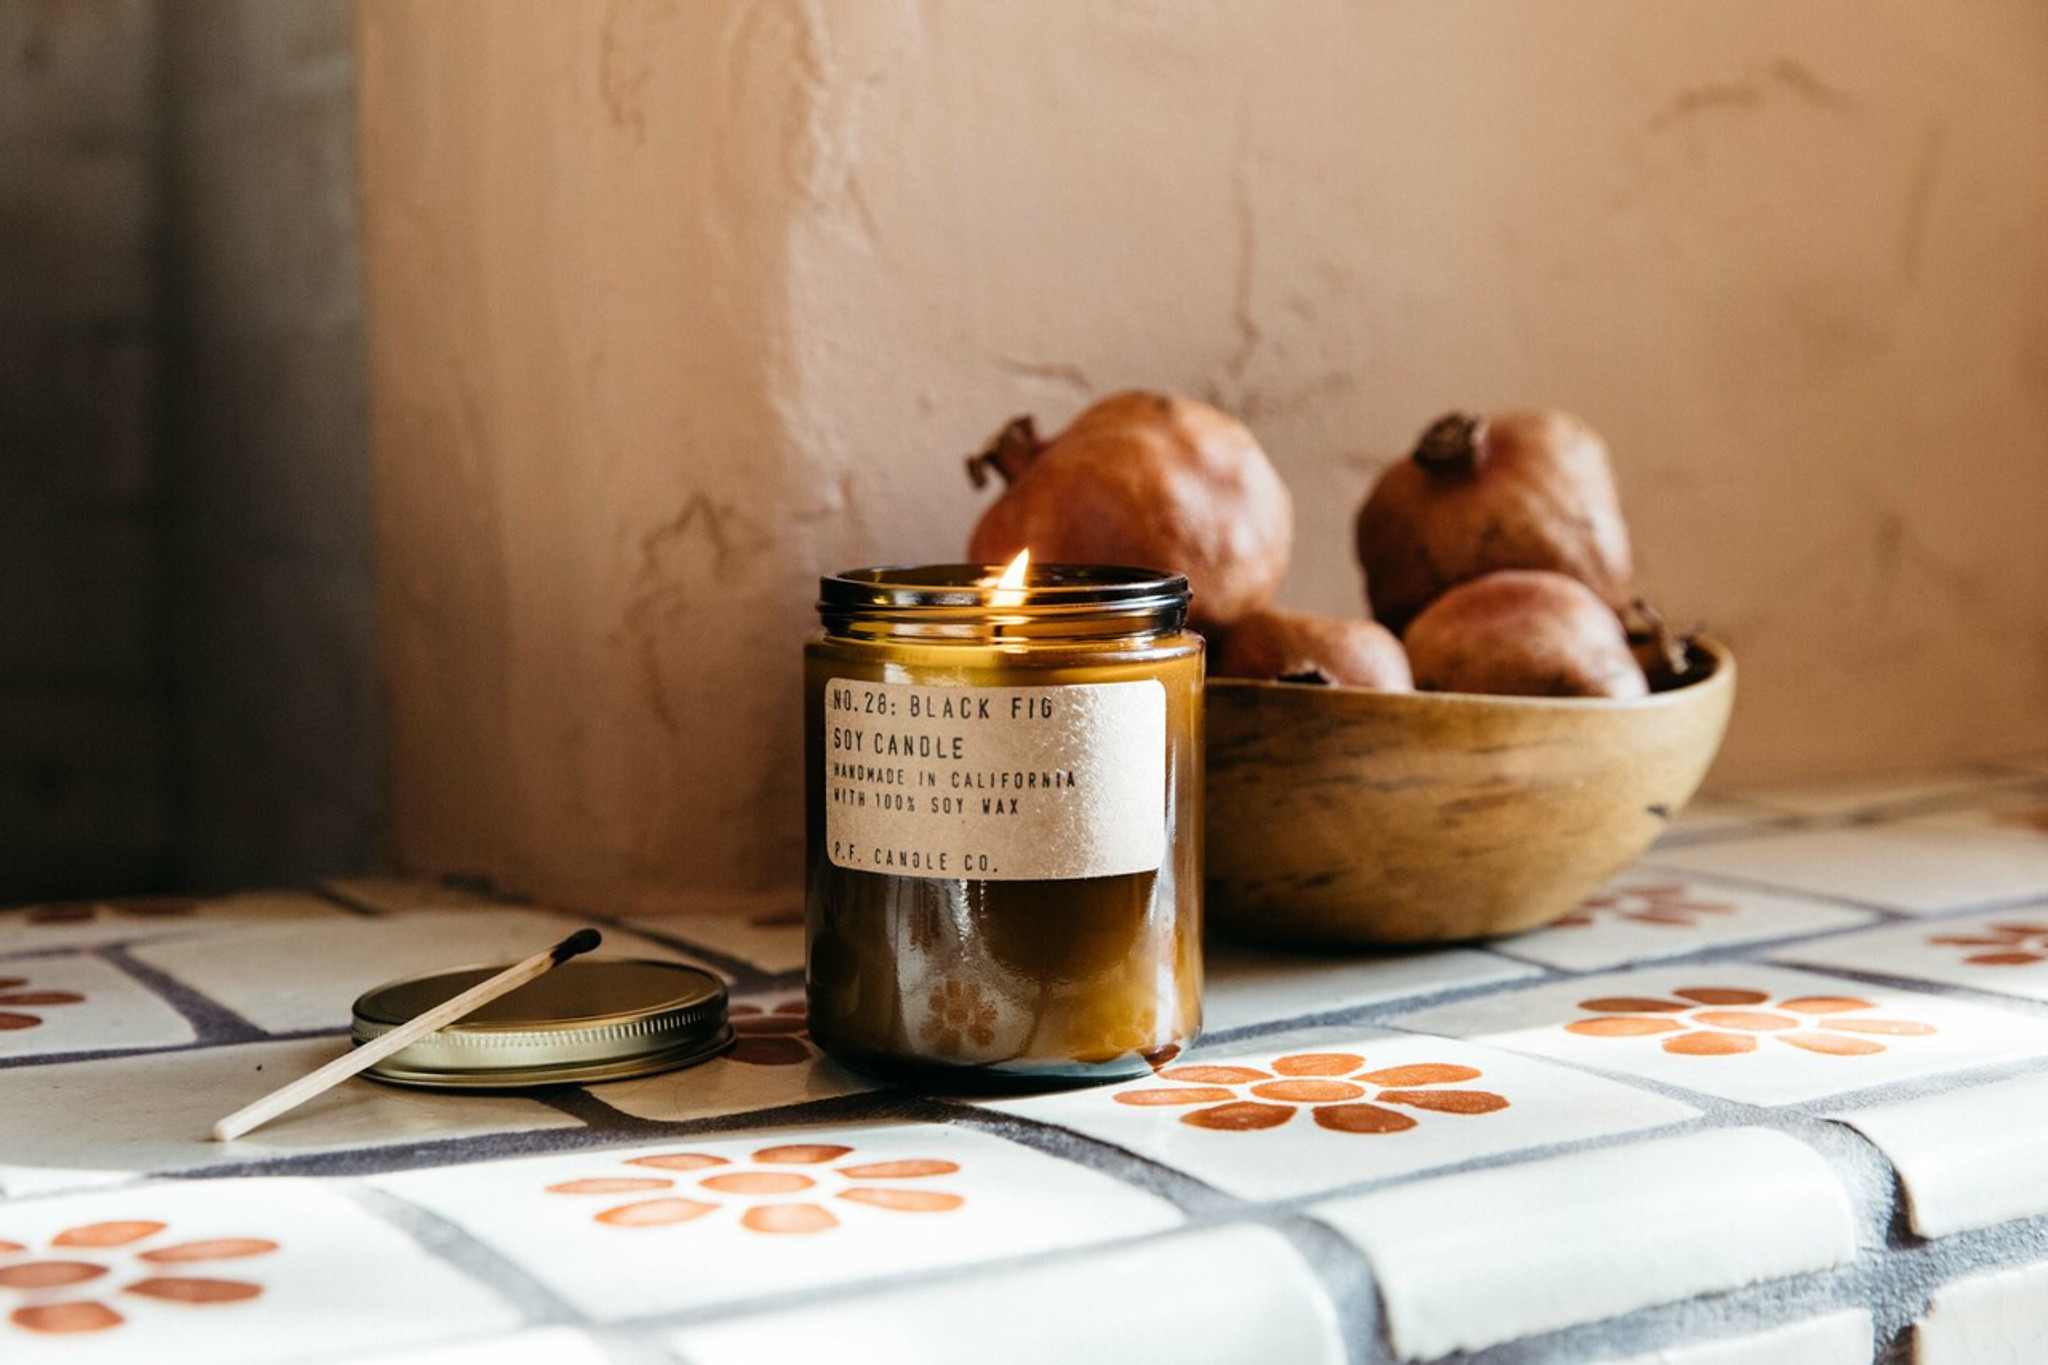 P.F. Candle Co, Candles, PF candle co, Ojai, Los Angeles, black fig candle, sustainable, handmade, small business, Backyard fruit trees, something baking in the oven. A little spicy and just sweet enough. Evergreen, mission fig, and spice.  | available in the elk & HAMMER Gallery of Bozeman, Montana; curated by Ashley Childs, artist, maker, owner and creative director of elk & HAMMER